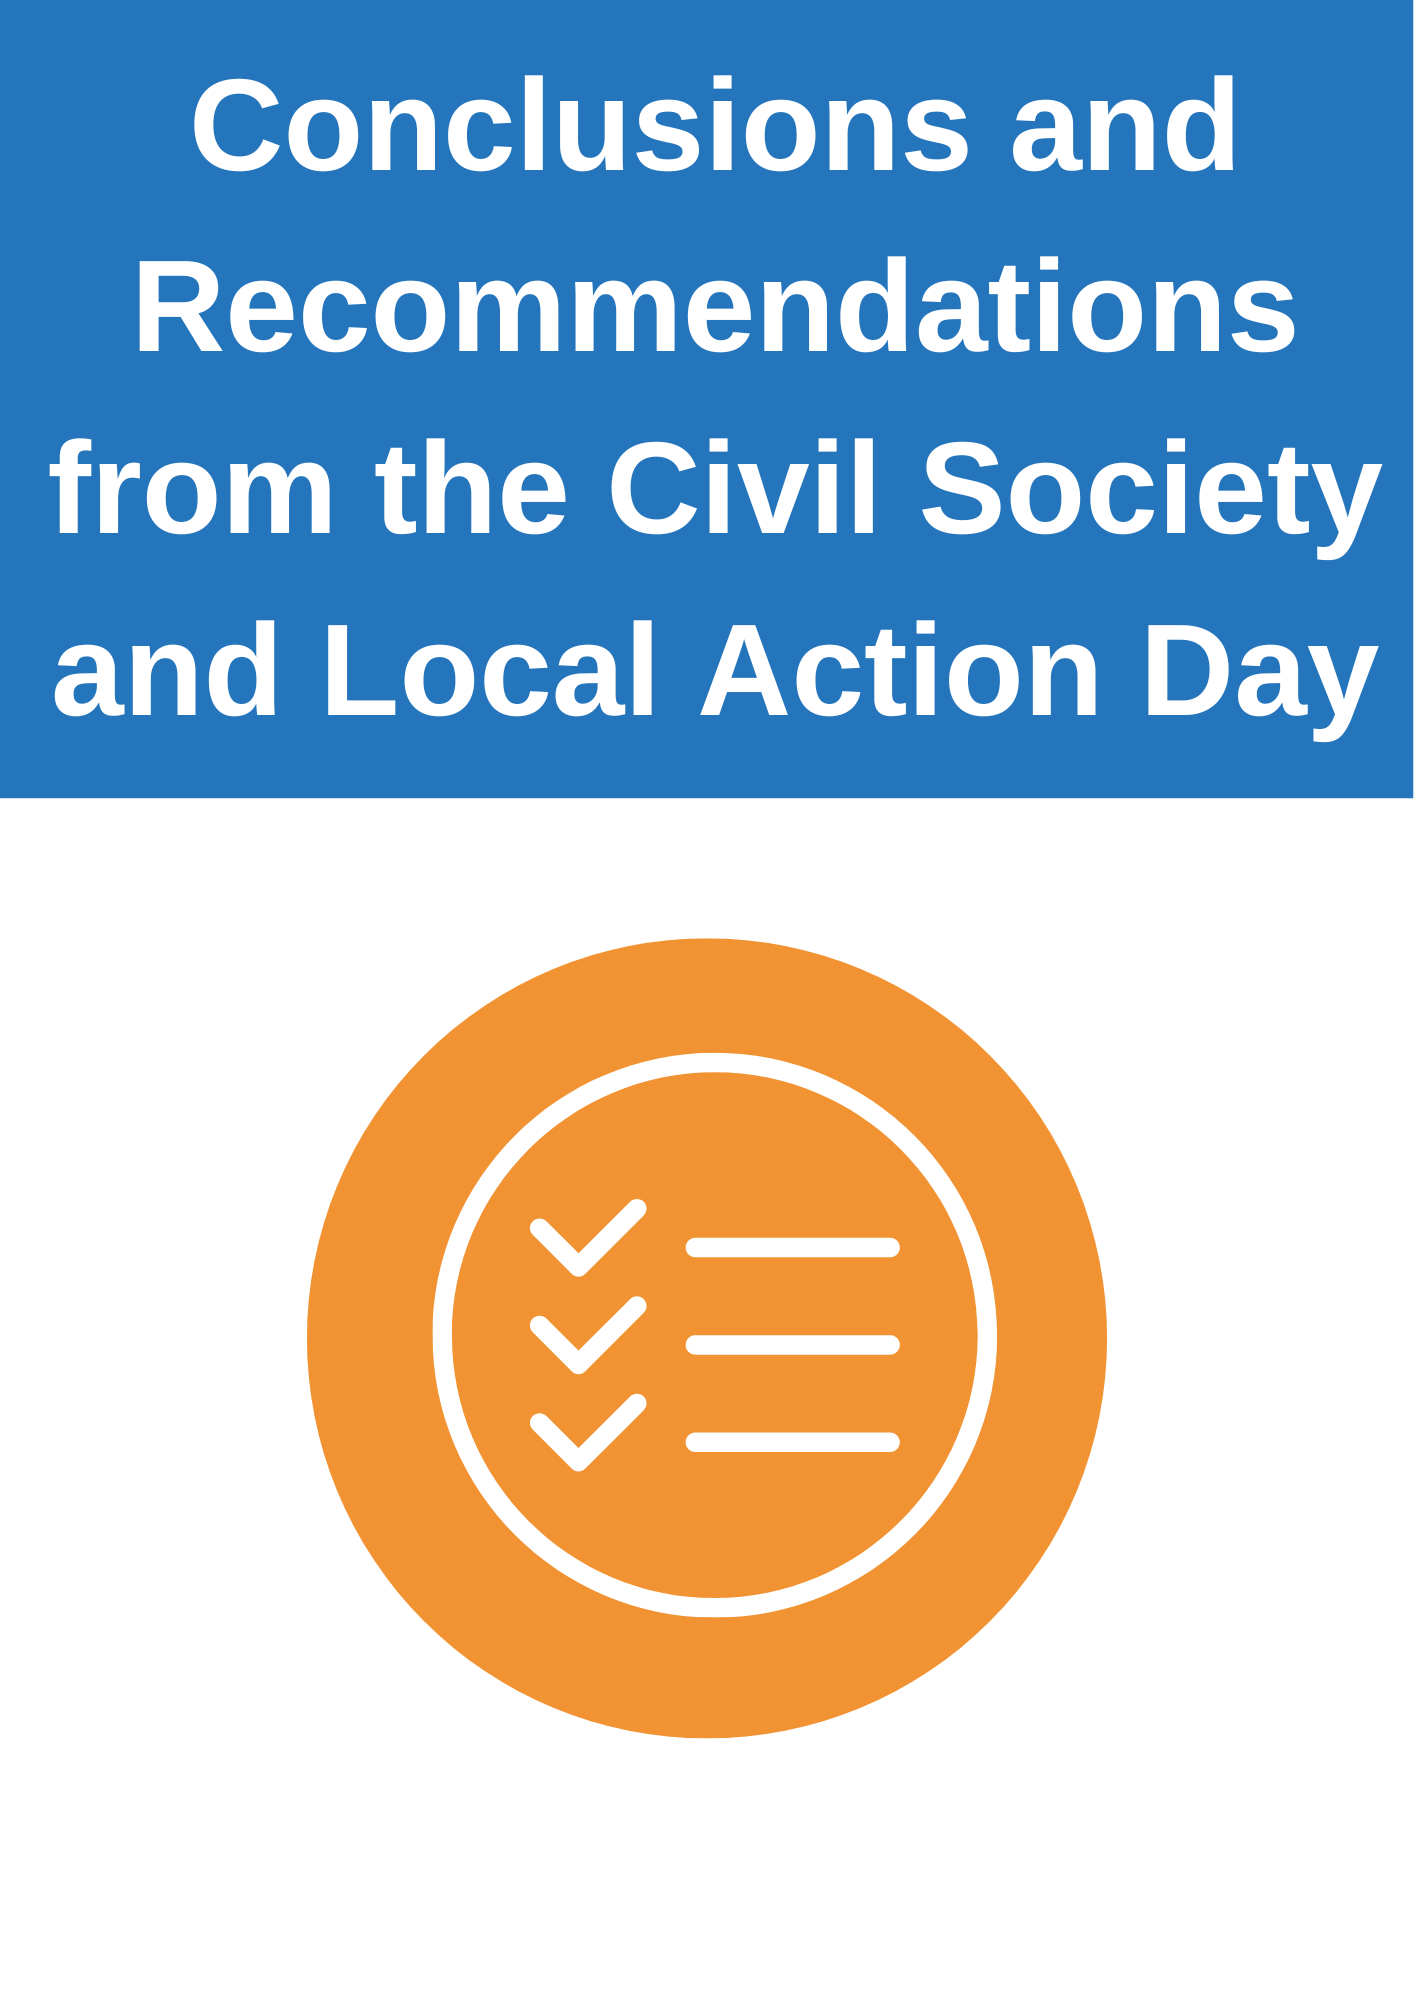 Conclusions and Recommendations from the Civil Society and Local Action Day